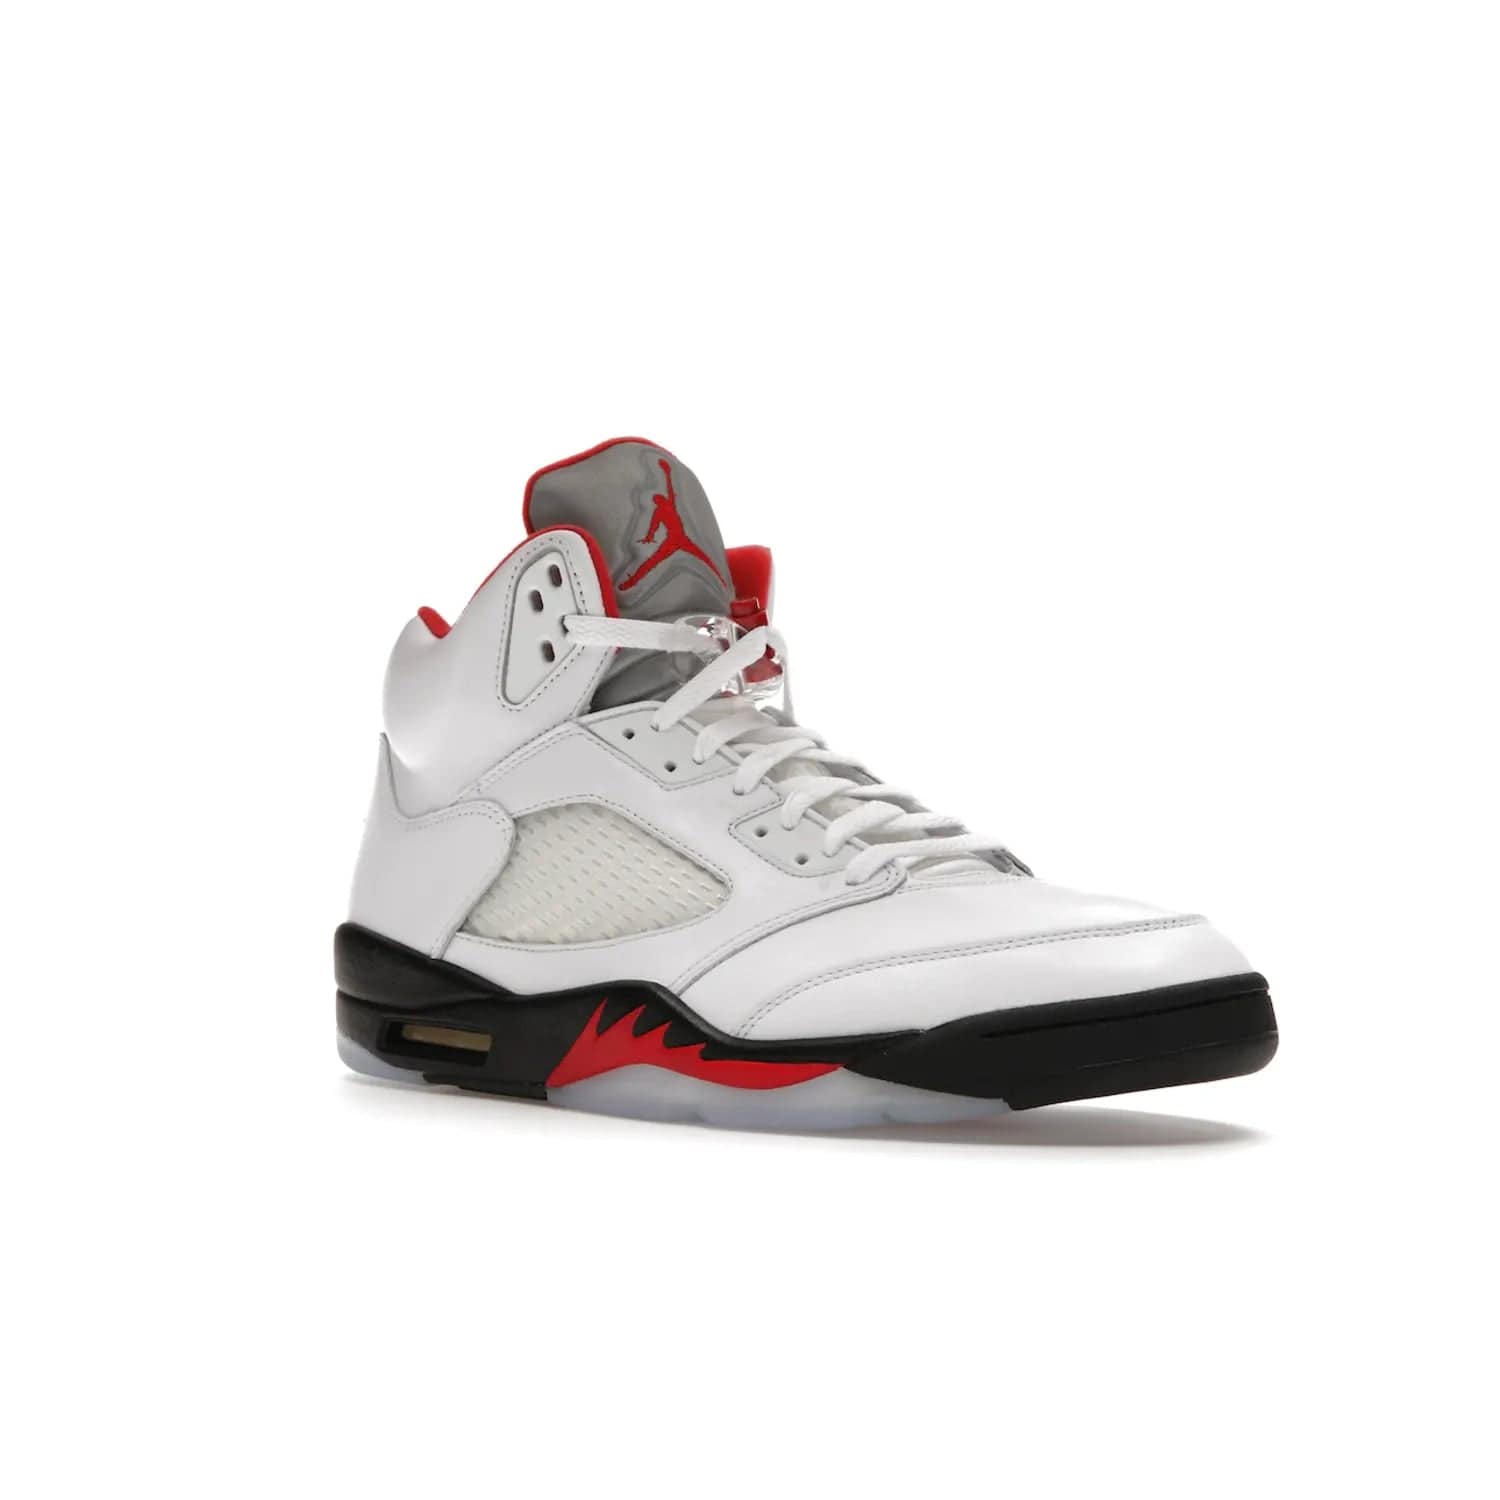 Jordan 5 Retro Fire Red Silver Tongue (2020) - Image 5 - Only at www.BallersClubKickz.com - Experience classic styling with the Jordan 5 Retro Fire Red Silver Tongue (2020). Features a white leather upper, 3M reflective tongue, midsole colorblocking, and an icy translucent outsole. Now available, upgrade your shoe collection today.